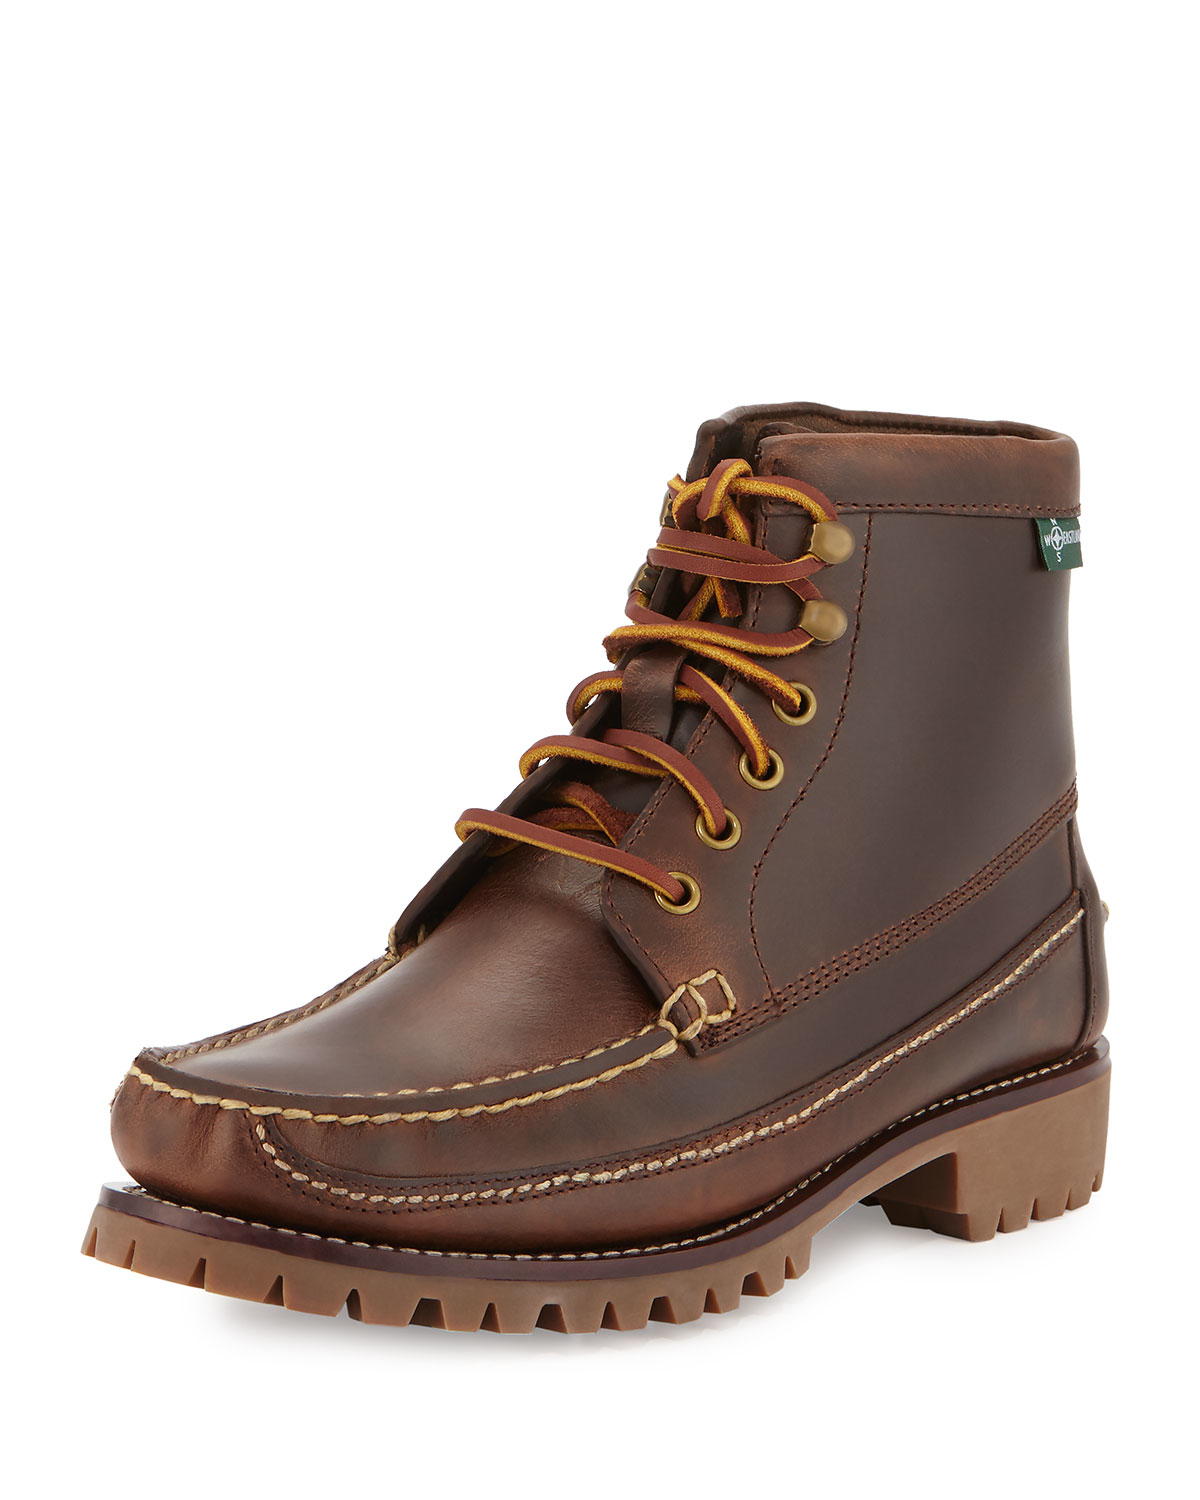 Lyst - Eastland 1955 Edition Franconia 1955 Ankle Boot in Brown for Men